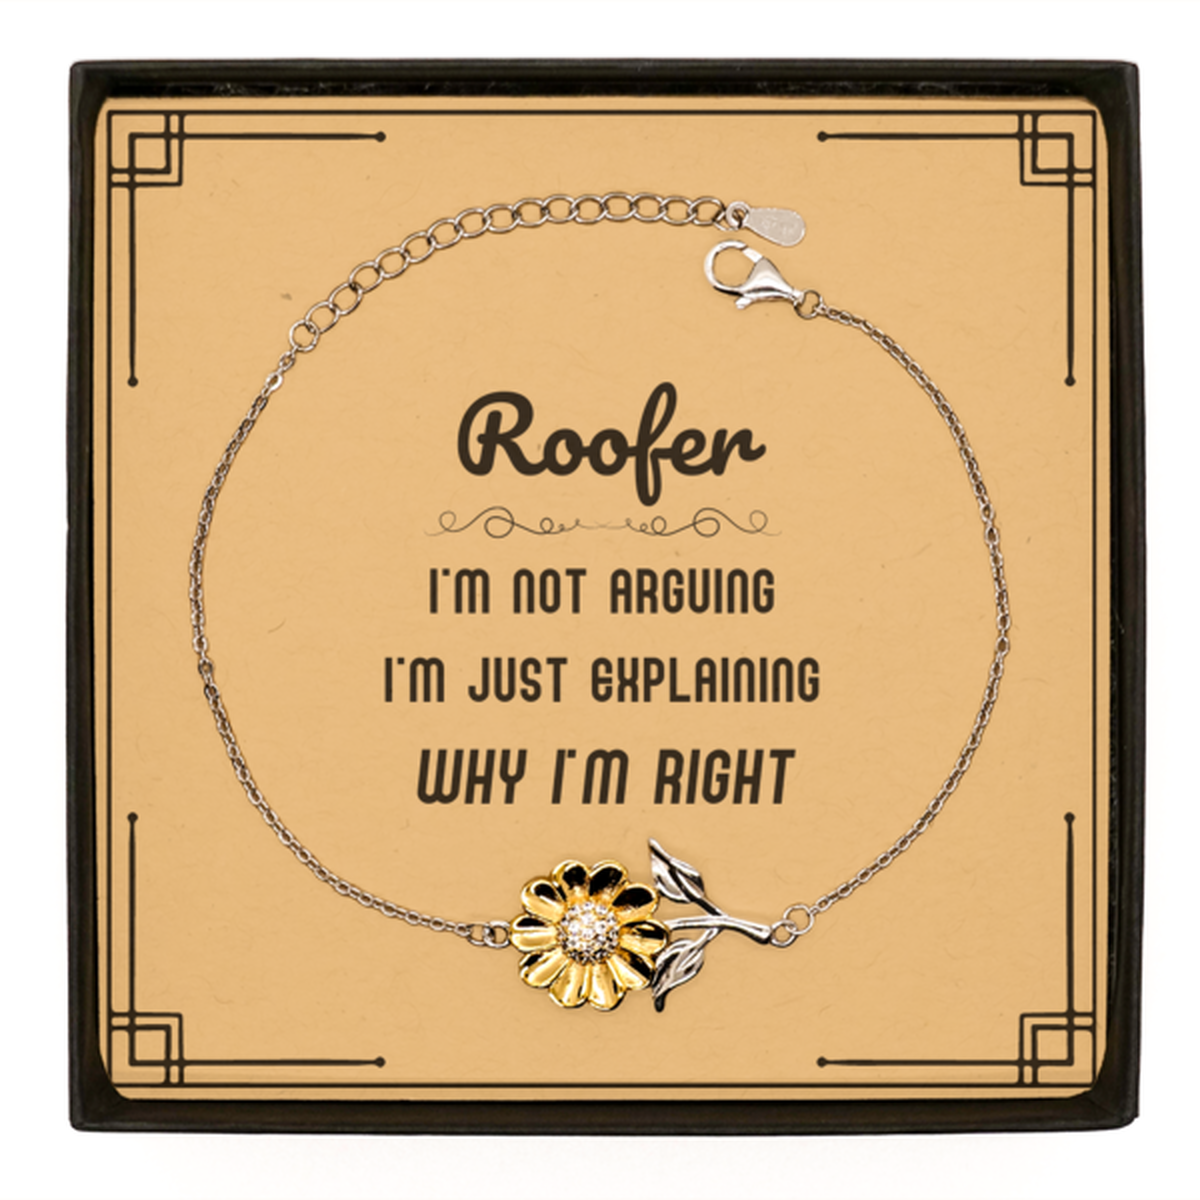 Roofer I'm not Arguing. I'm Just Explaining Why I'm RIGHT Sunflower Bracelet, Funny Saying Quote Roofer Gifts For Roofer Message Card Graduation Birthday Christmas Gifts for Men Women Coworker